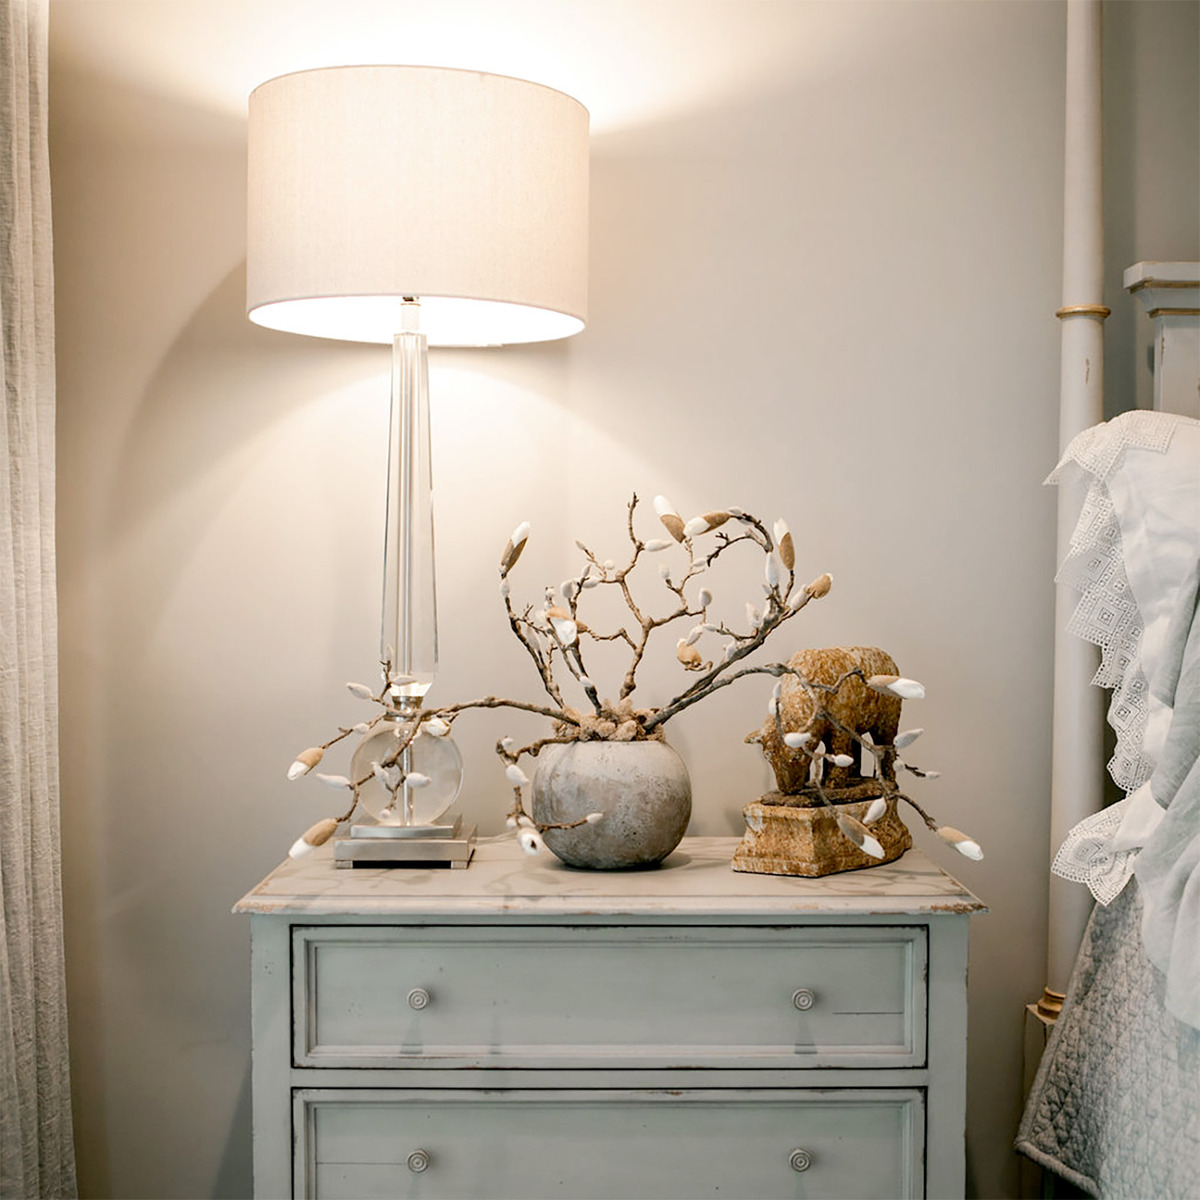 How To Decorate Nightstand With Lamp